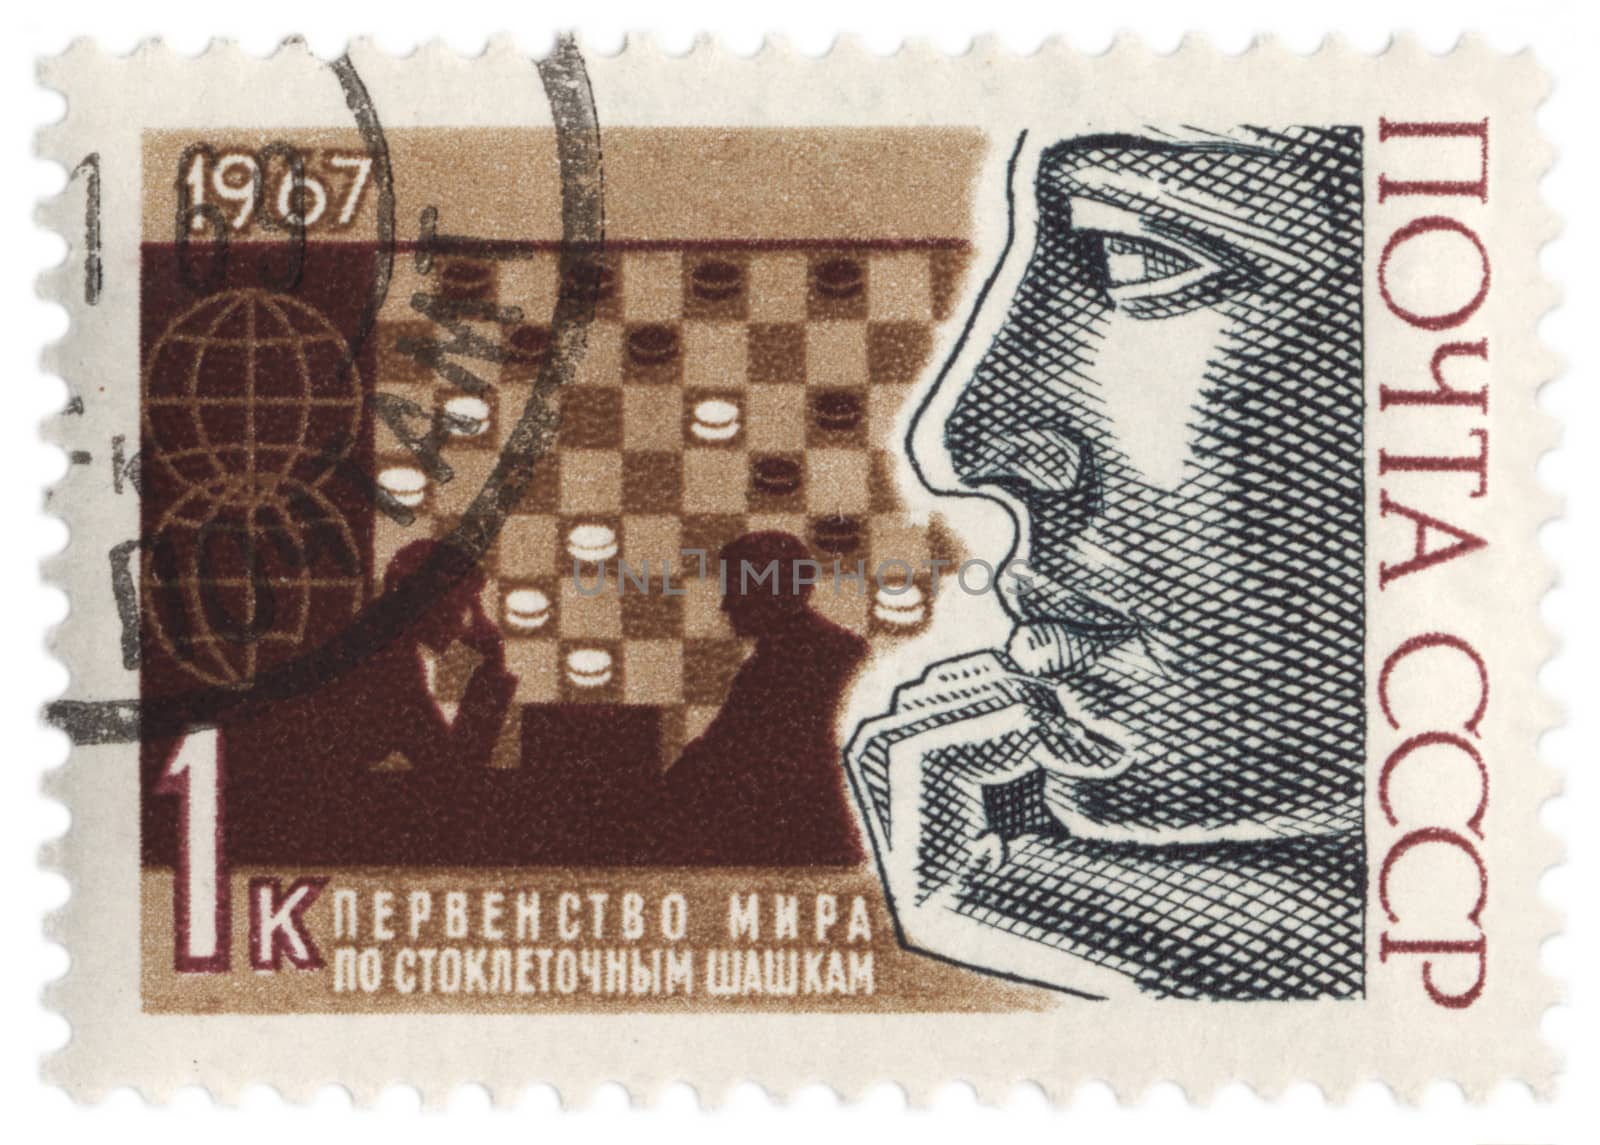 World Championship Checkers on post stamp by wander